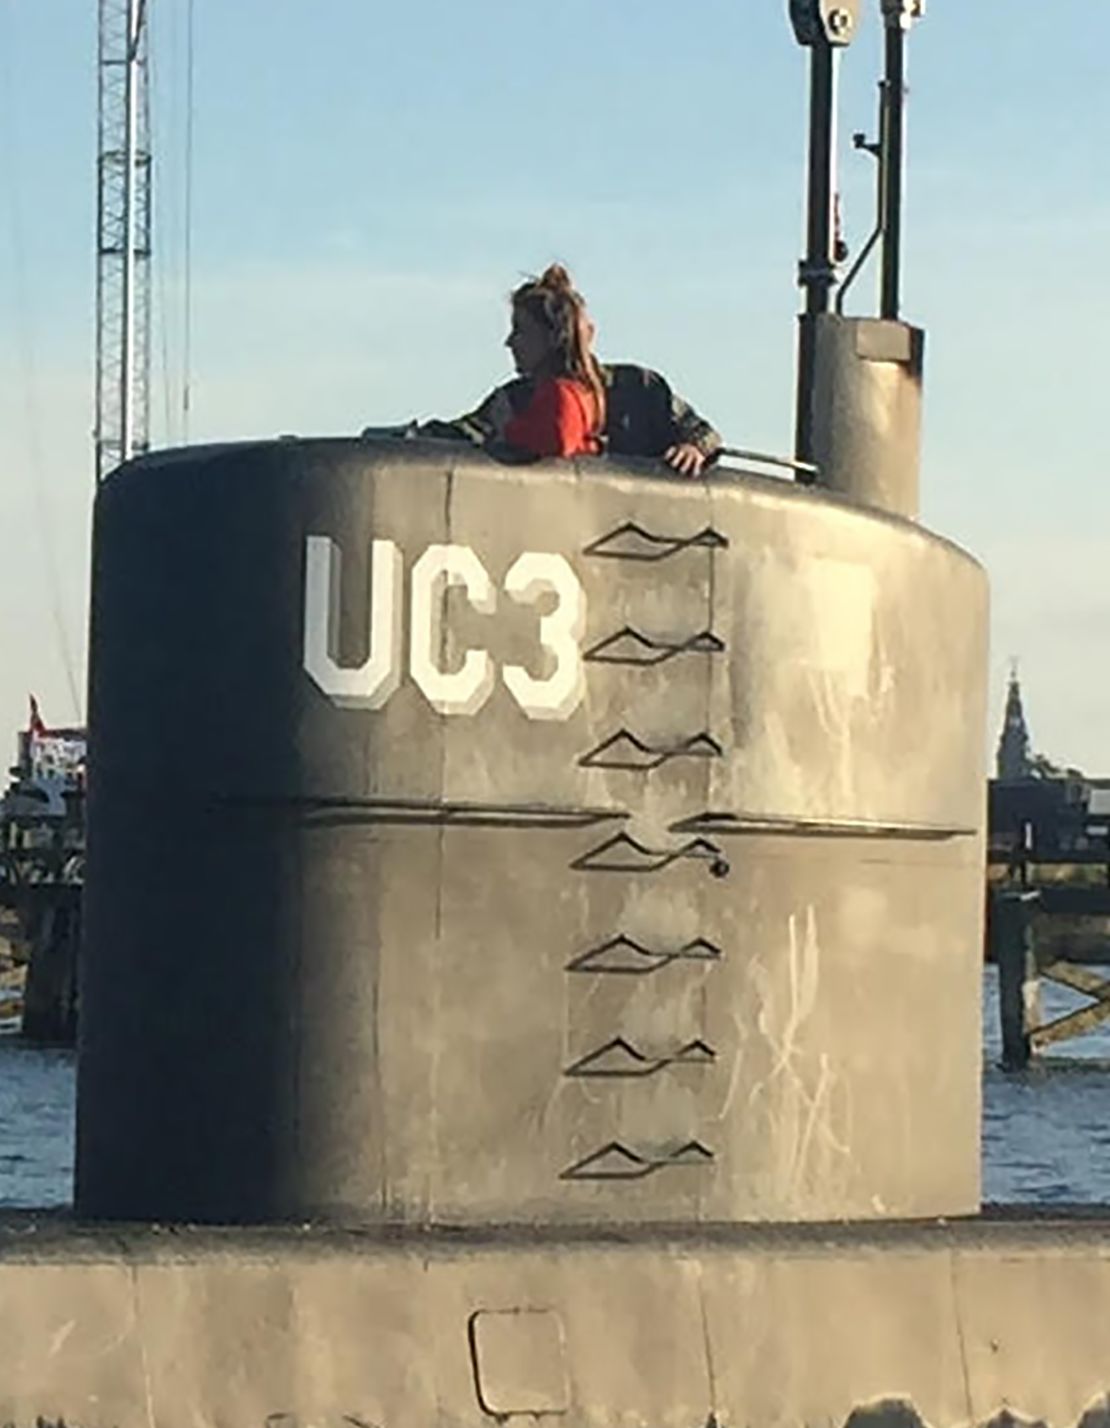 This photo allegedly shows Swedish journalist Kim Wall standing in the tower of the private submarine "UC3 Nautilus" on August 10 in Copenhagen Harbor.
